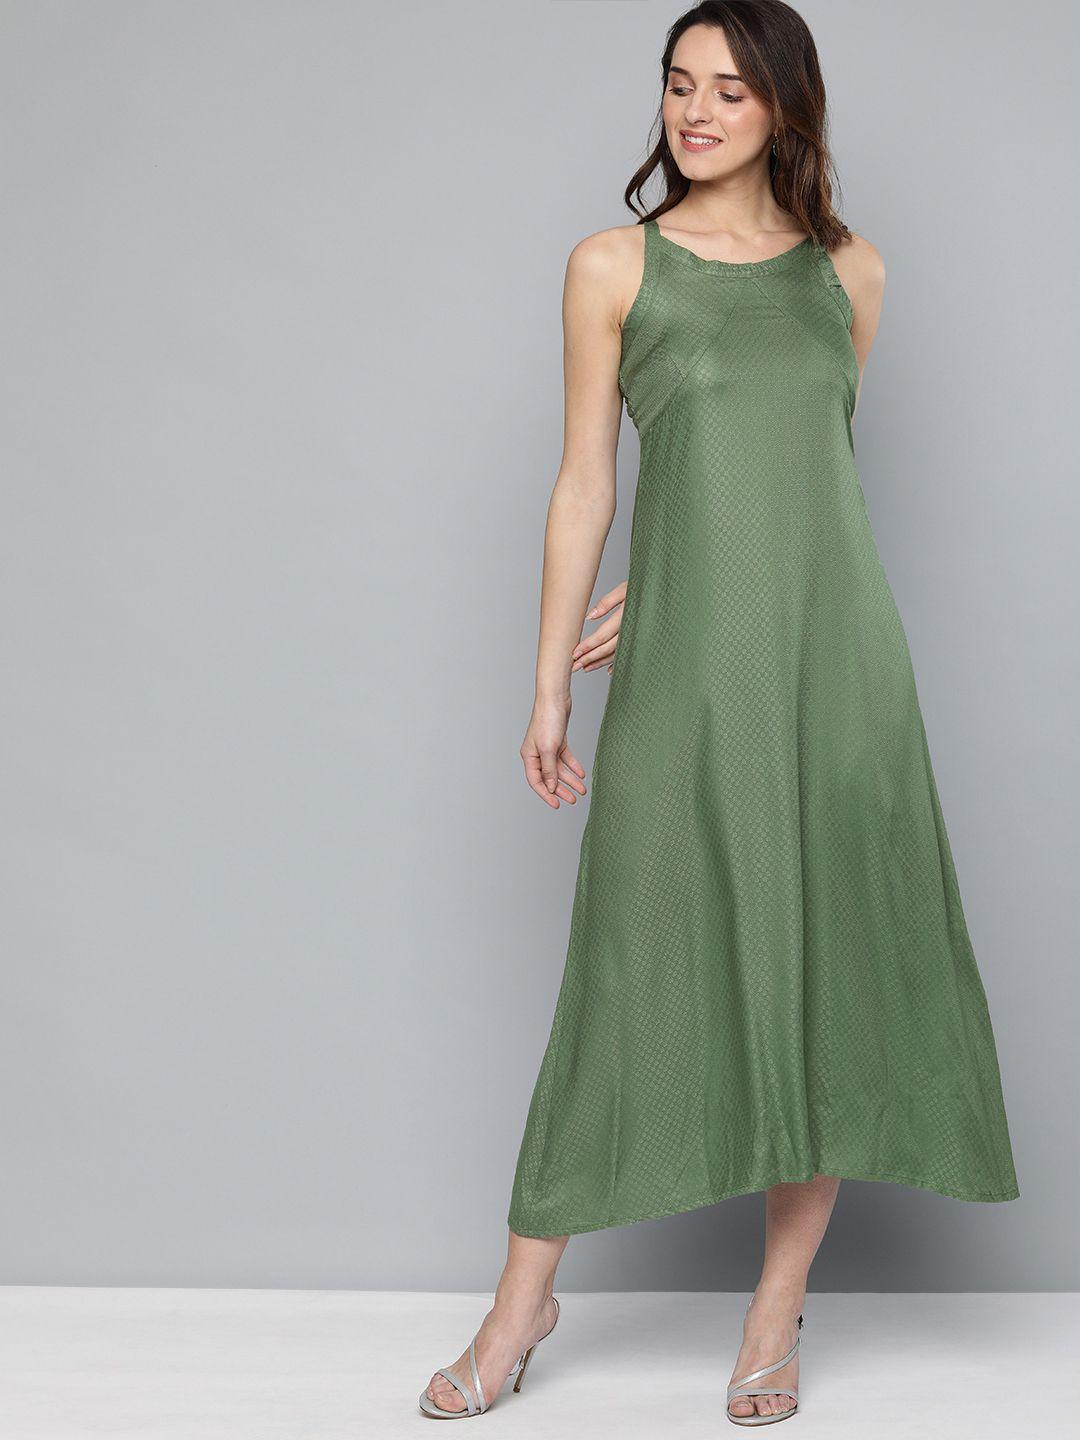 here&now women green self design a-line dress with smocked detail